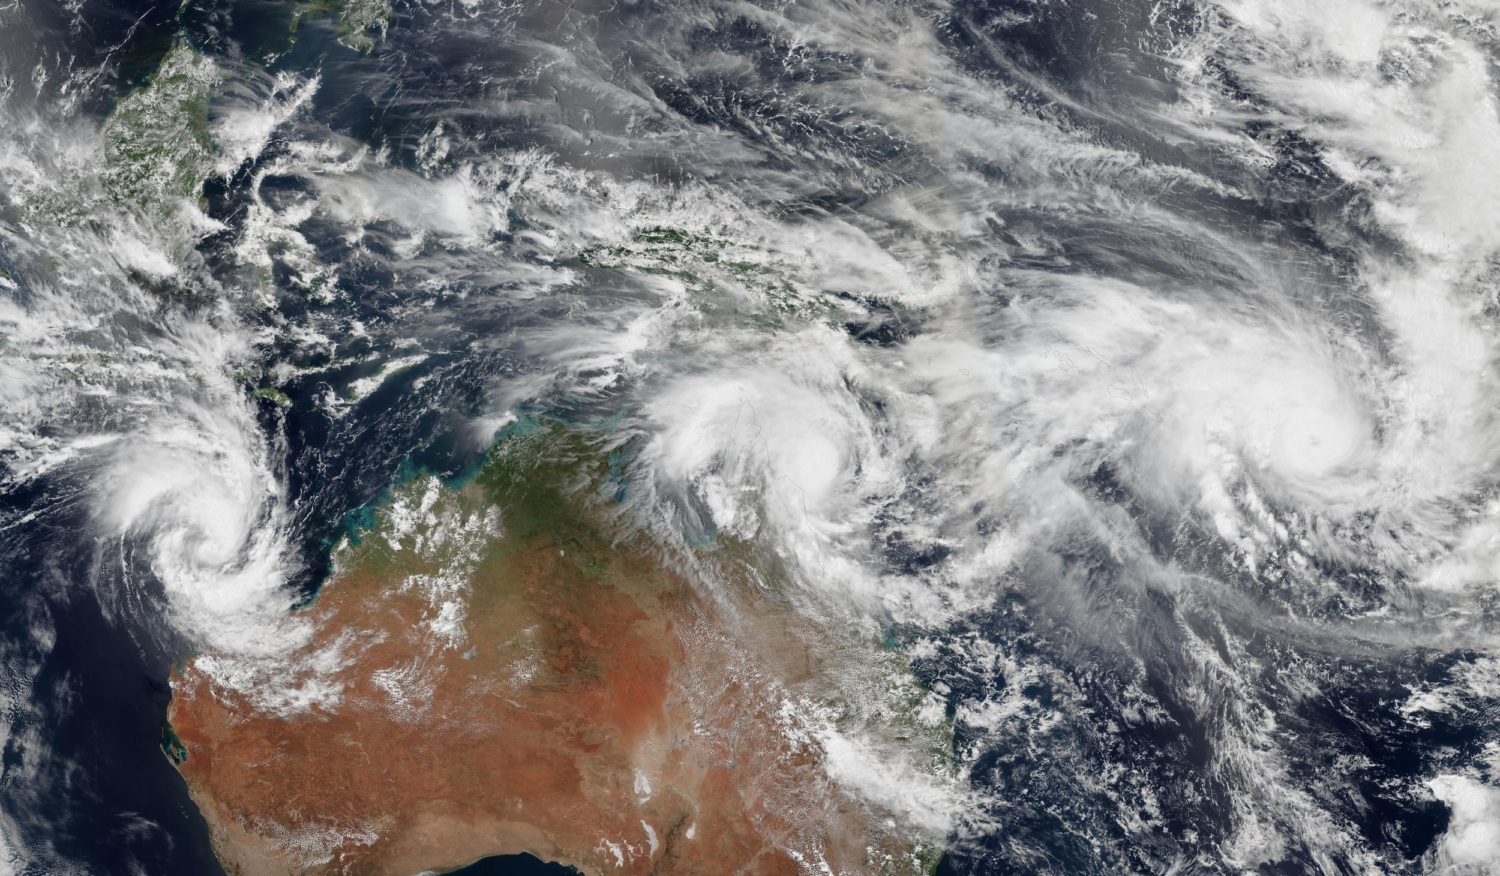 Cyclone Pam batters South Pacific Islands on March 11, 2015. The Category 5 storm hit late night on March 13, causing widespread damage in the archipelago nation of Vanuatu.